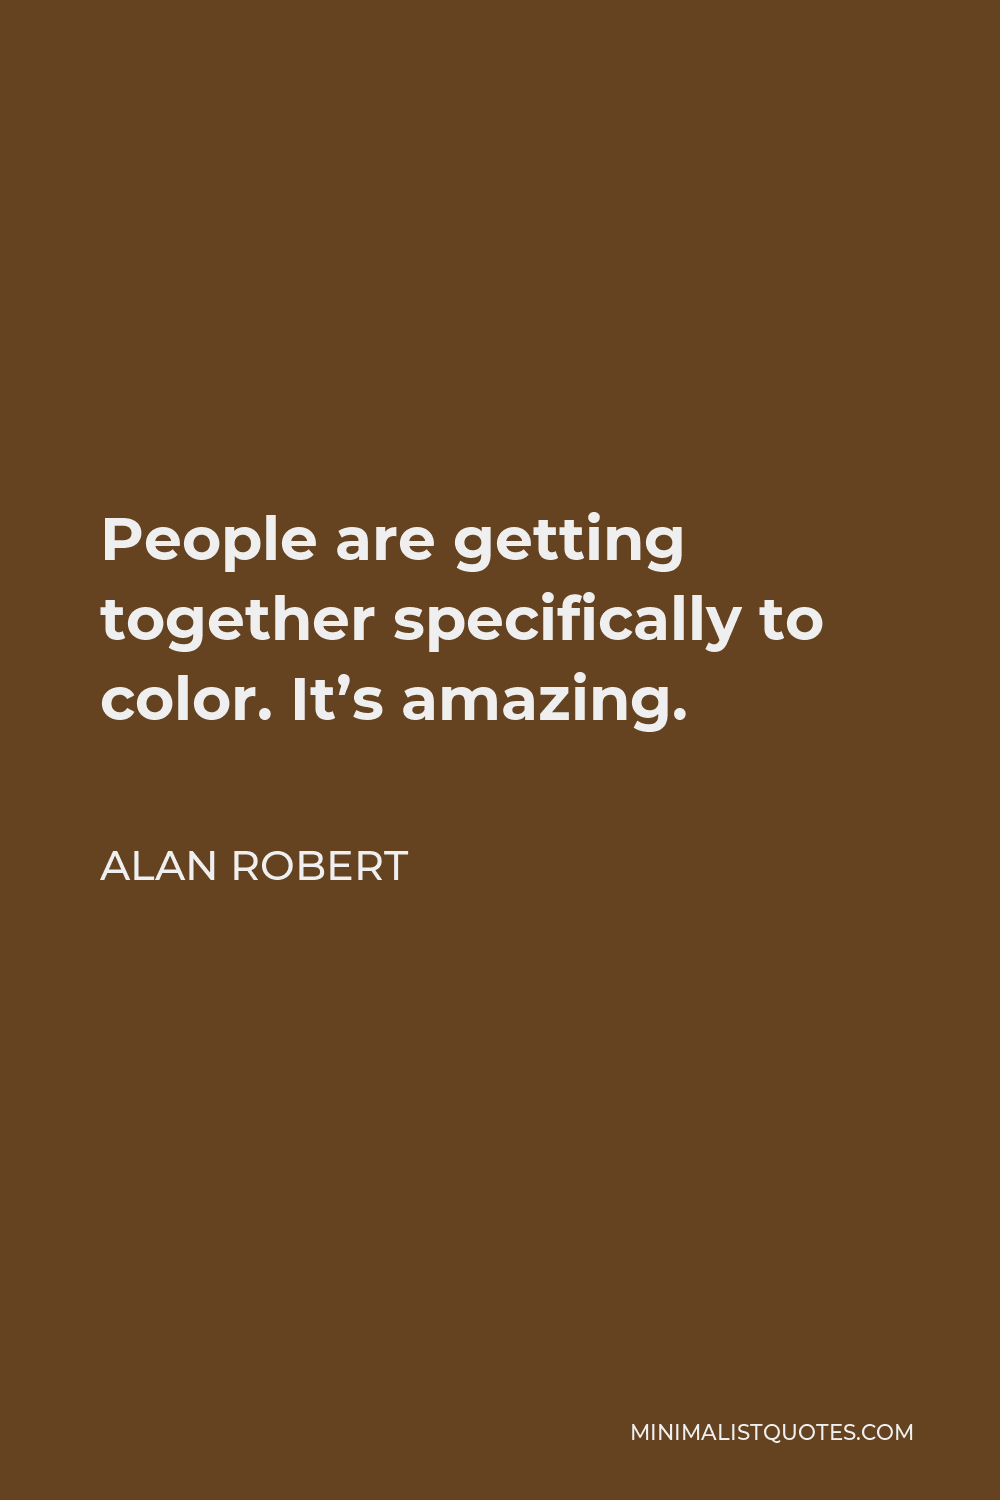 Alan Robert Quote - People are getting together specifically to color. It’s amazing.